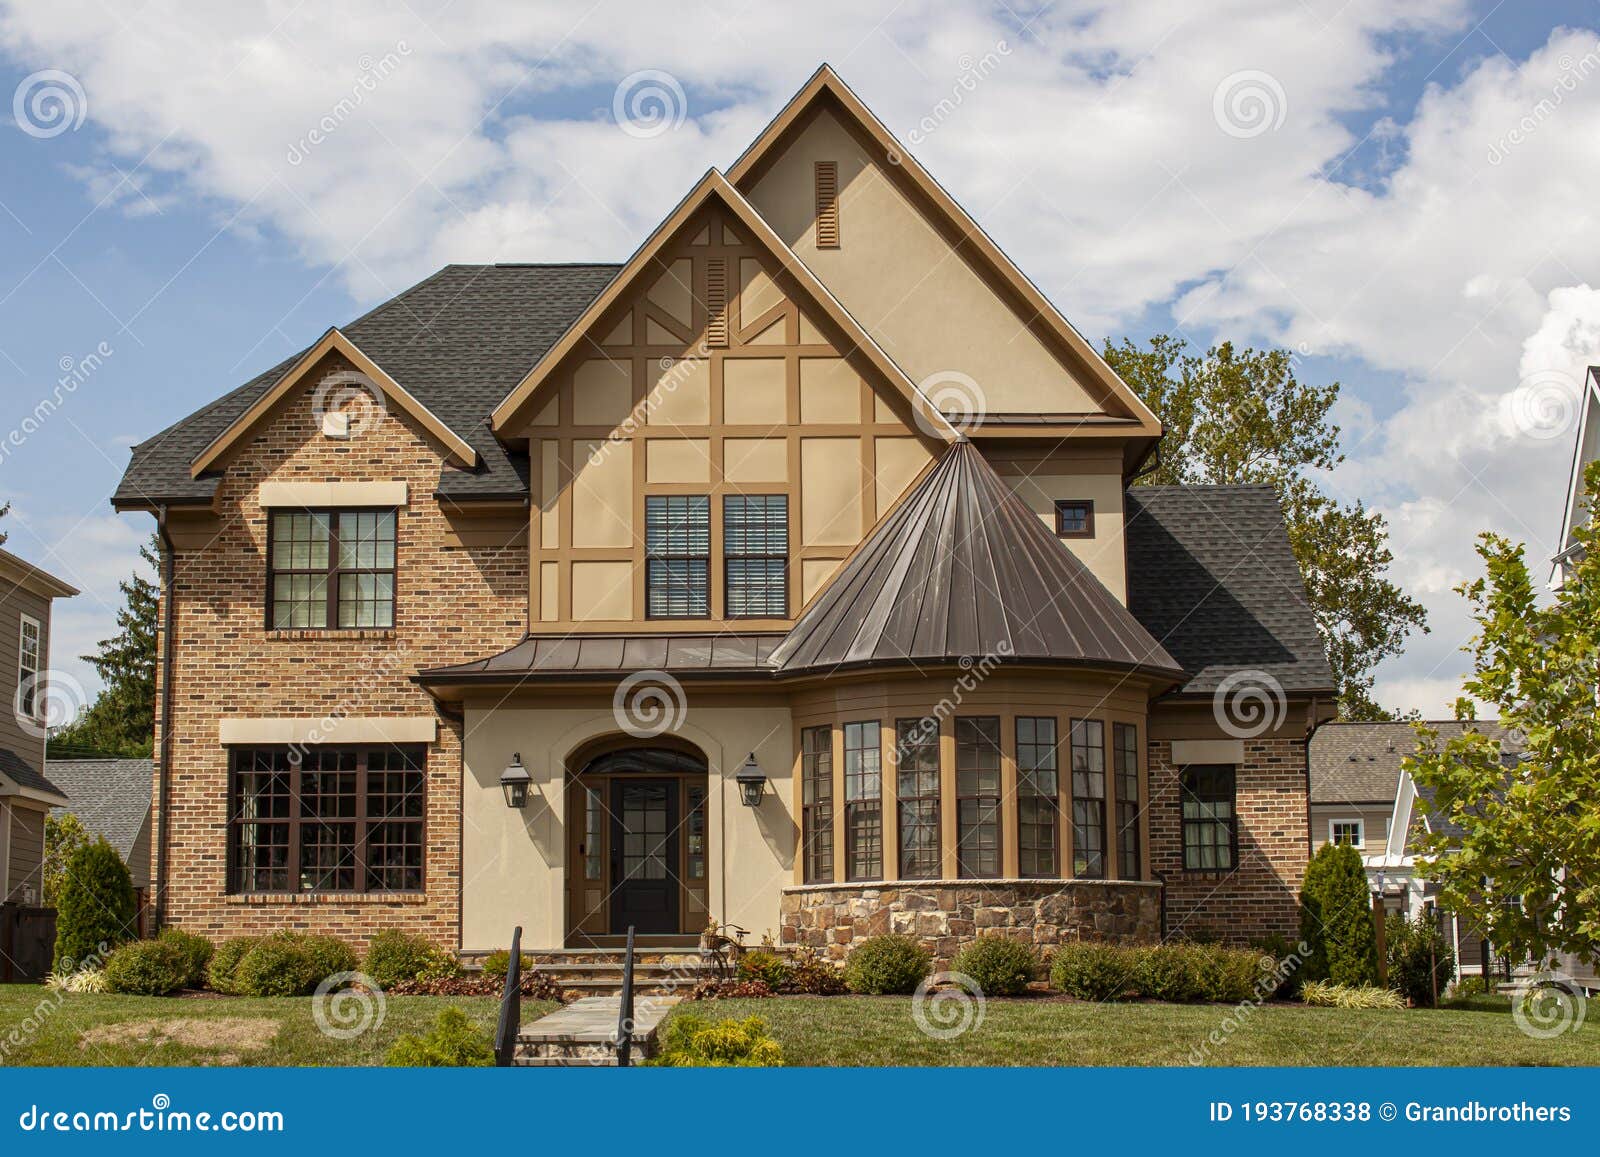  Exterior  Of A Beautiful Single Family  Home  In Frederick 